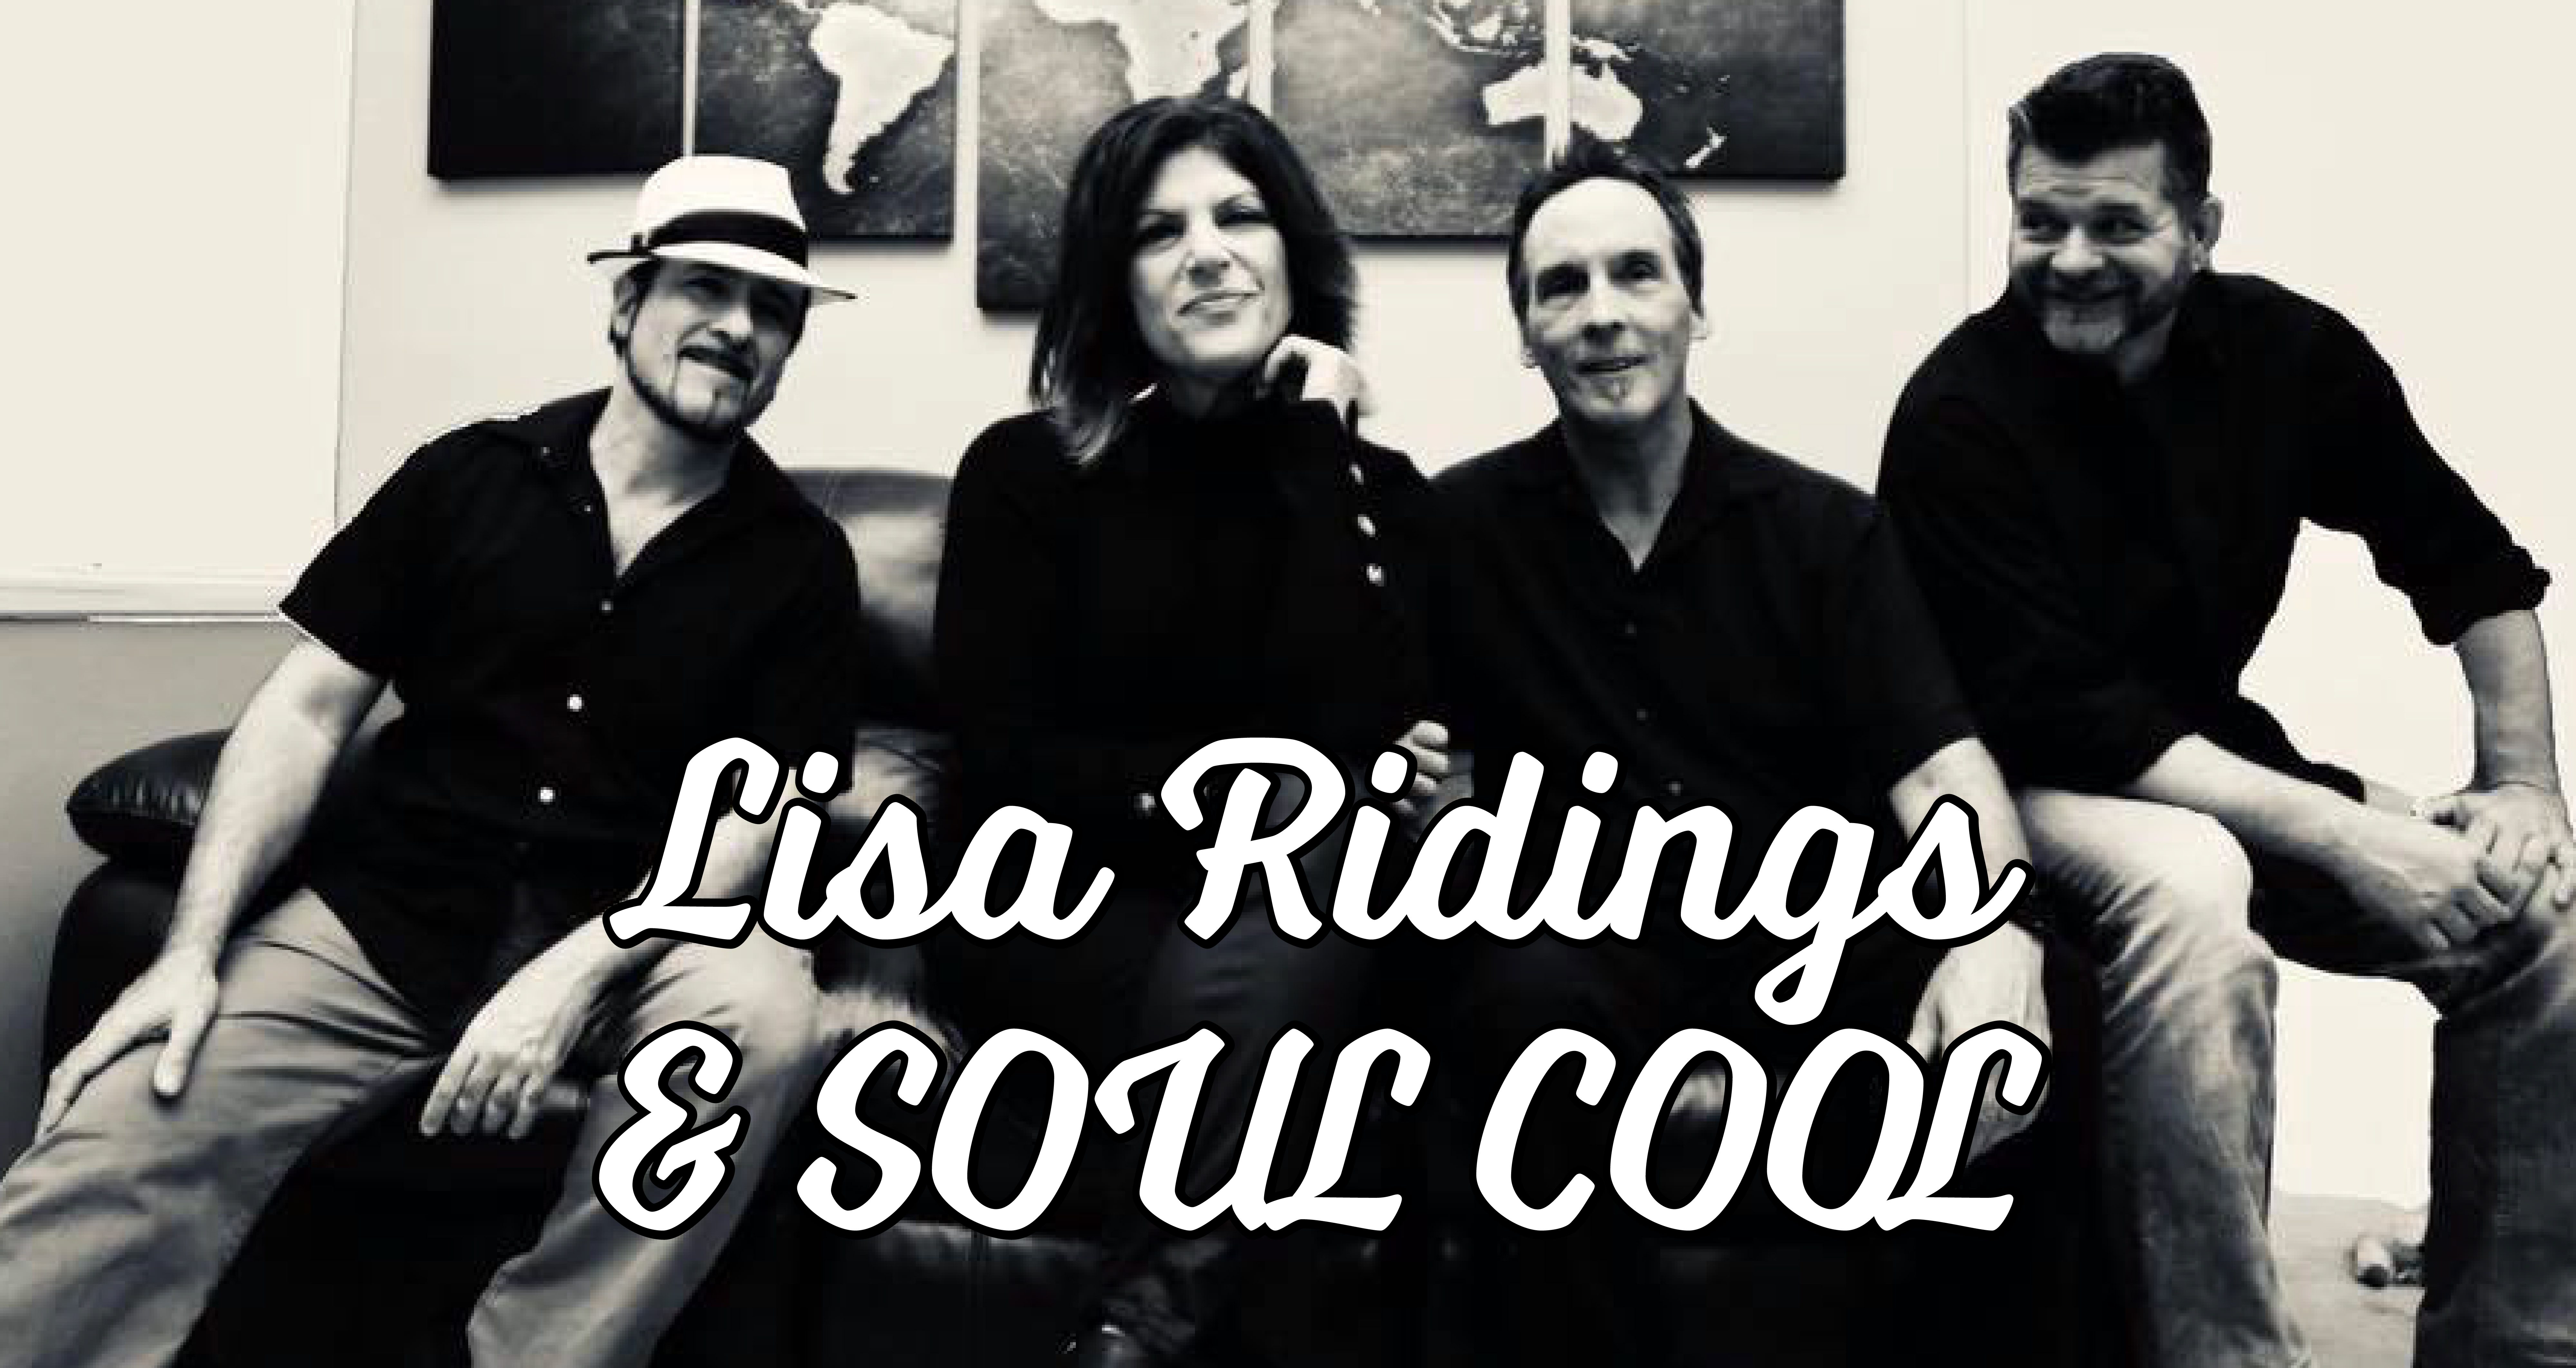 Lisa Ridings & Soul Cool Band with title posted in front